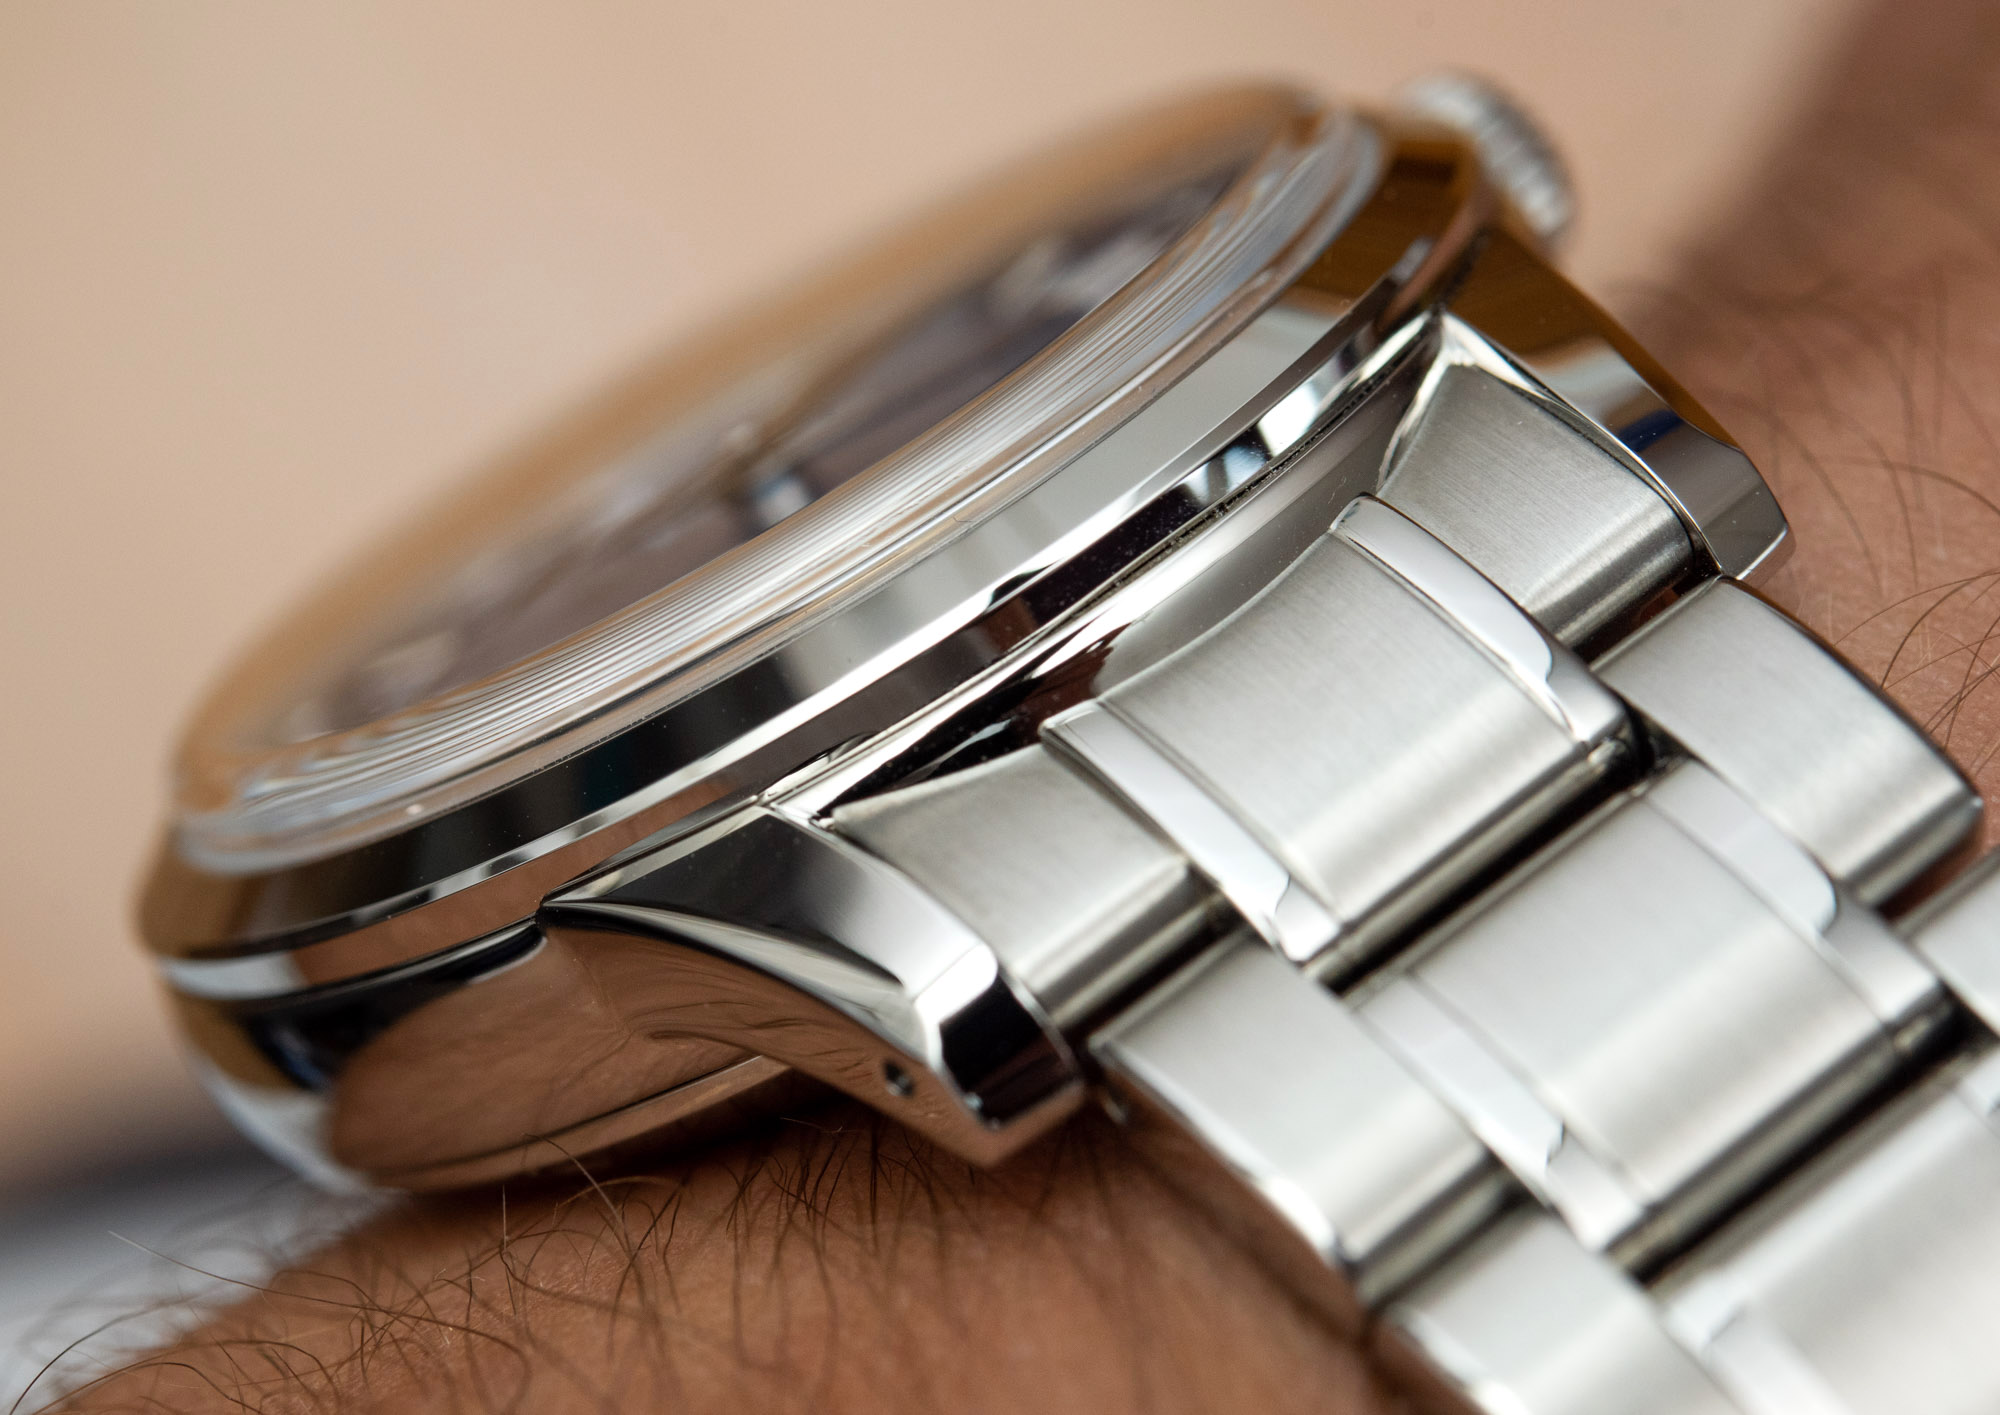 Hands-On With The Spectacular Grand Seiko SBGJ249 